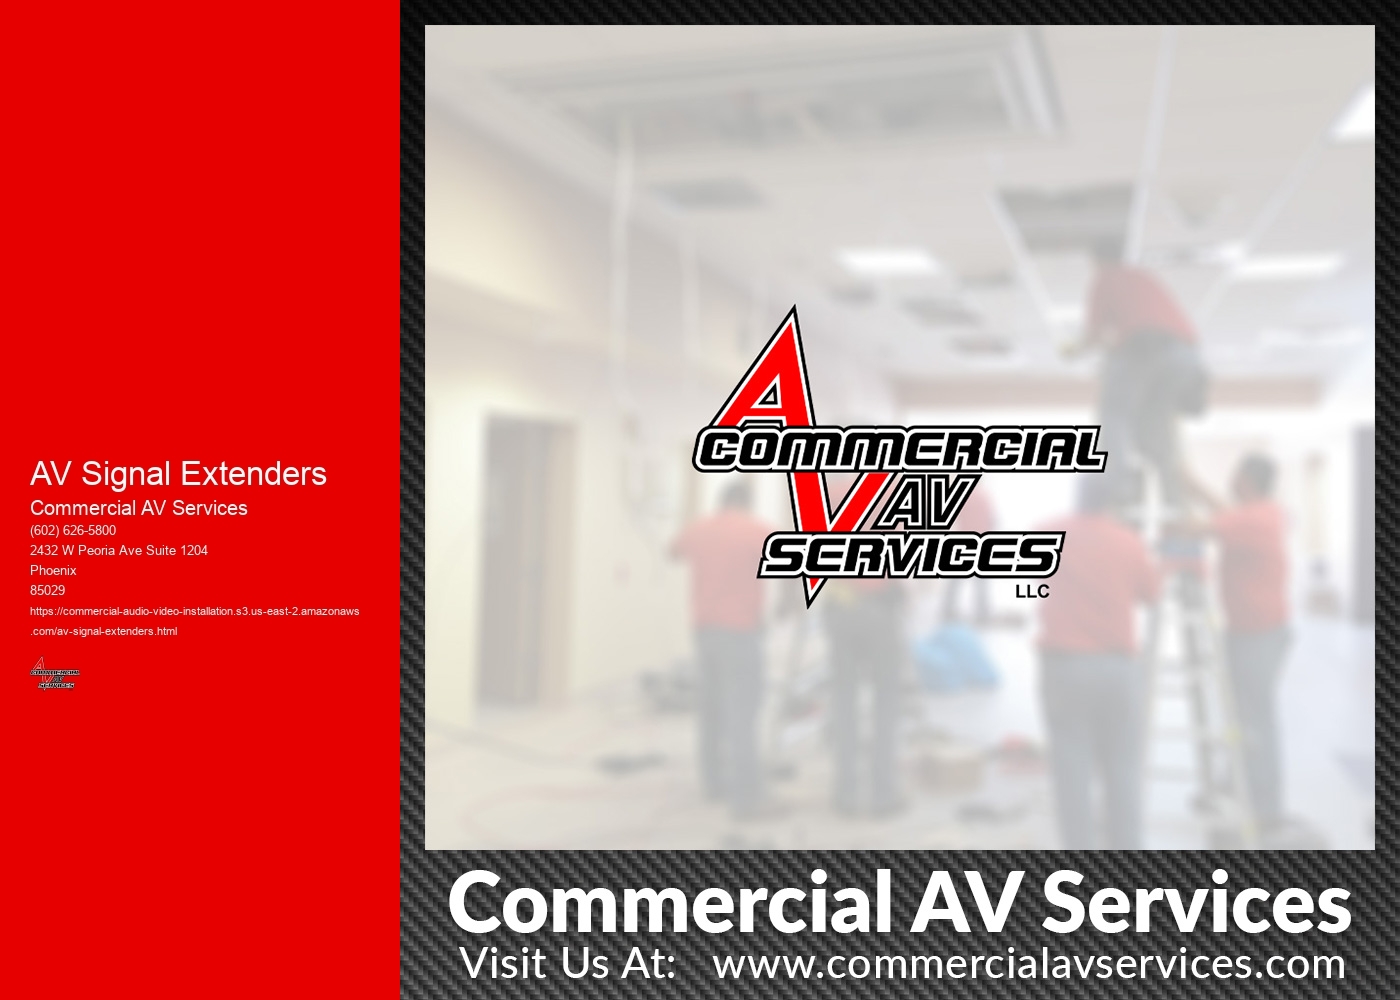 Are there any specific considerations to keep in mind while installing an AV signal extender?